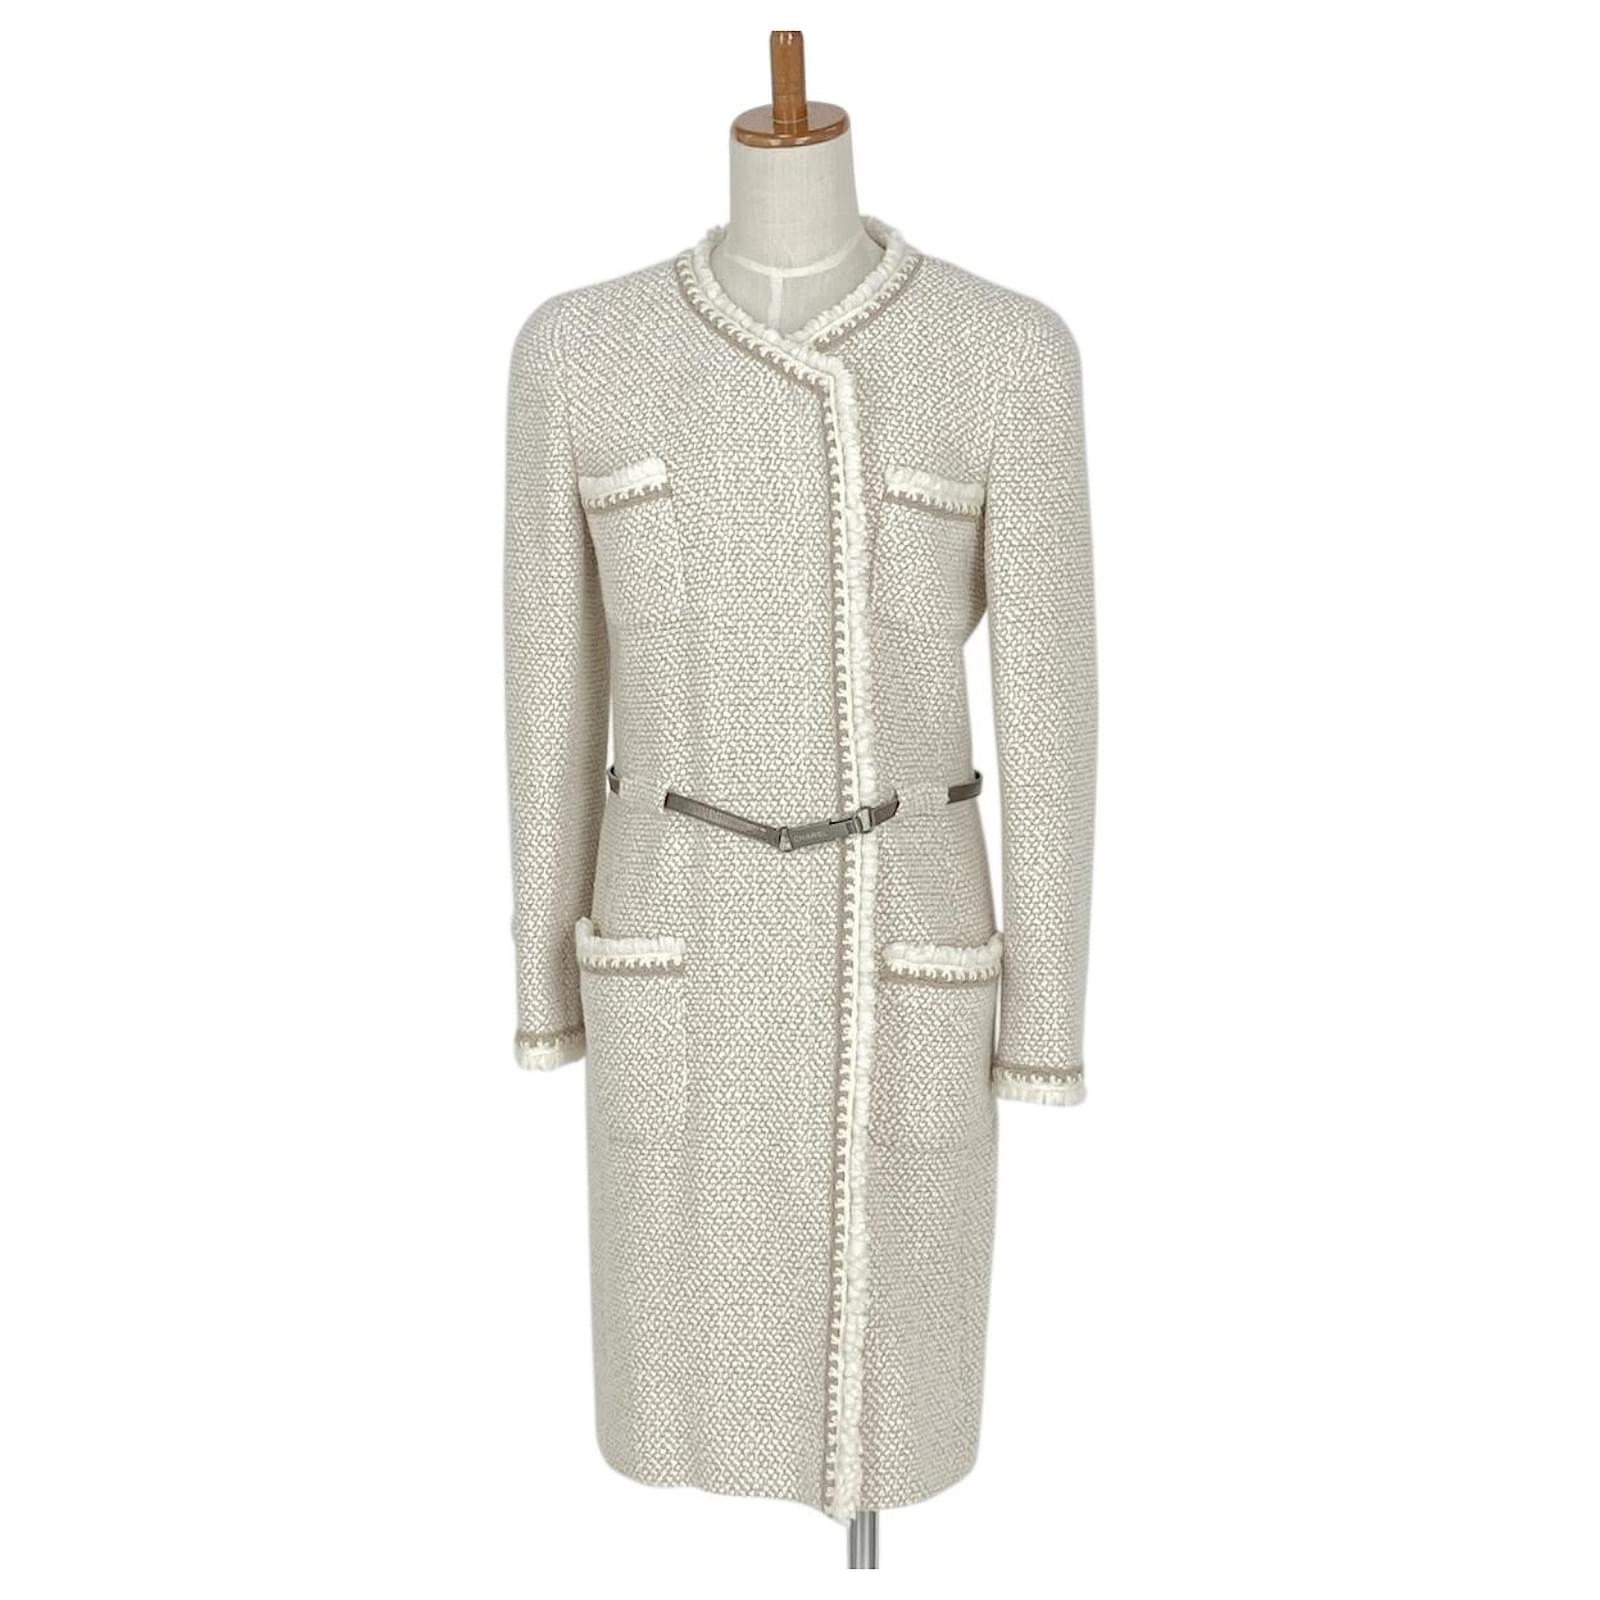 Chanel Vintage long sleeve tweed coat 3006  Boucle jacket outfit  Fashion clothes women Clothes